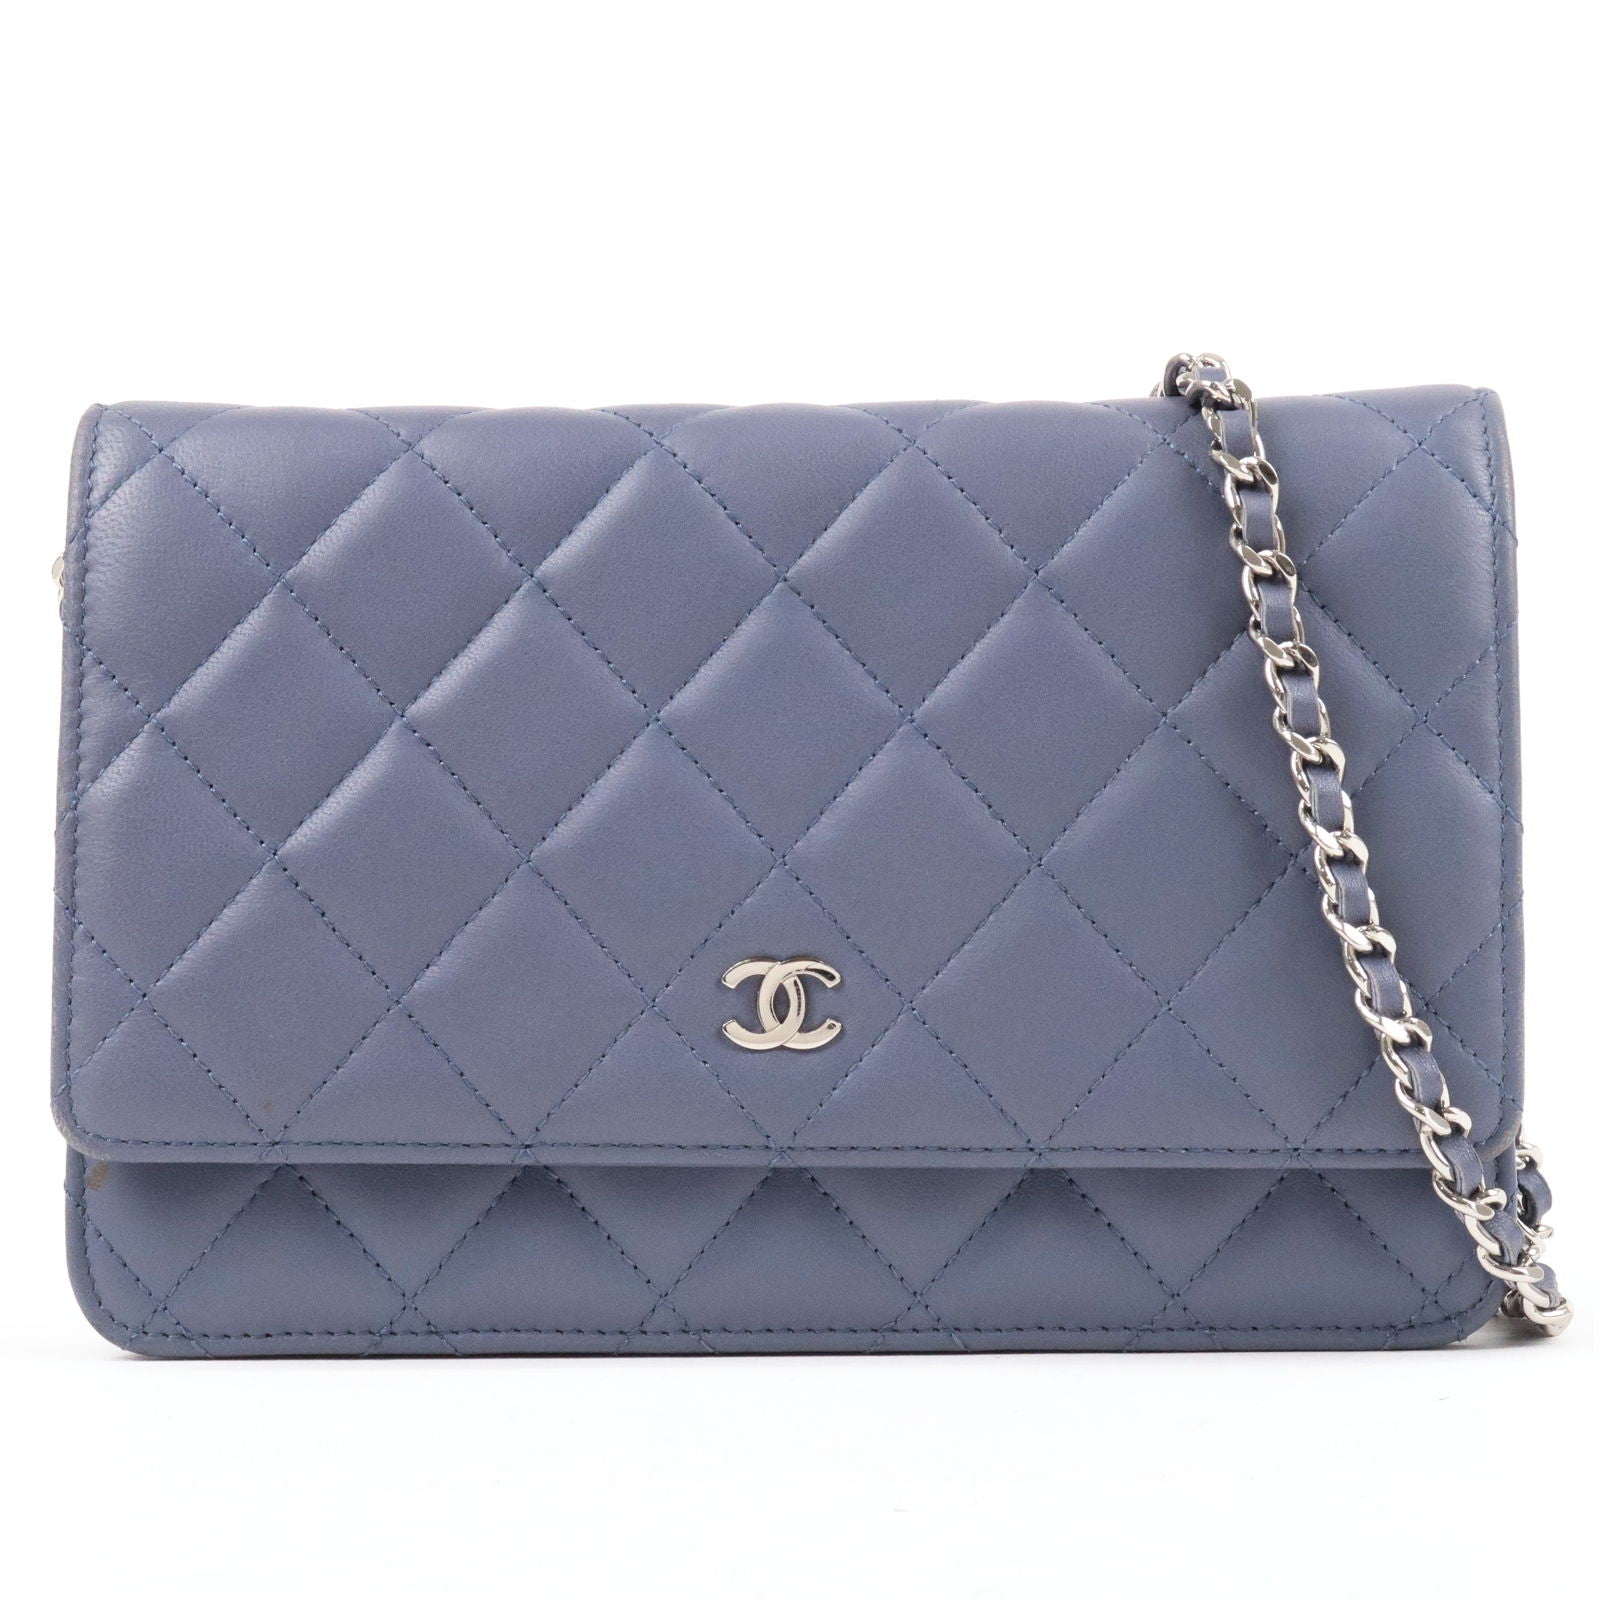 Lamb - ep_vintage luxury Store - A33814 – dct - Wallet - CHANEL - Chain -  Skin - WOC - Chanel Pre-Owned 1990s colour-block top - Matelasse - Blue